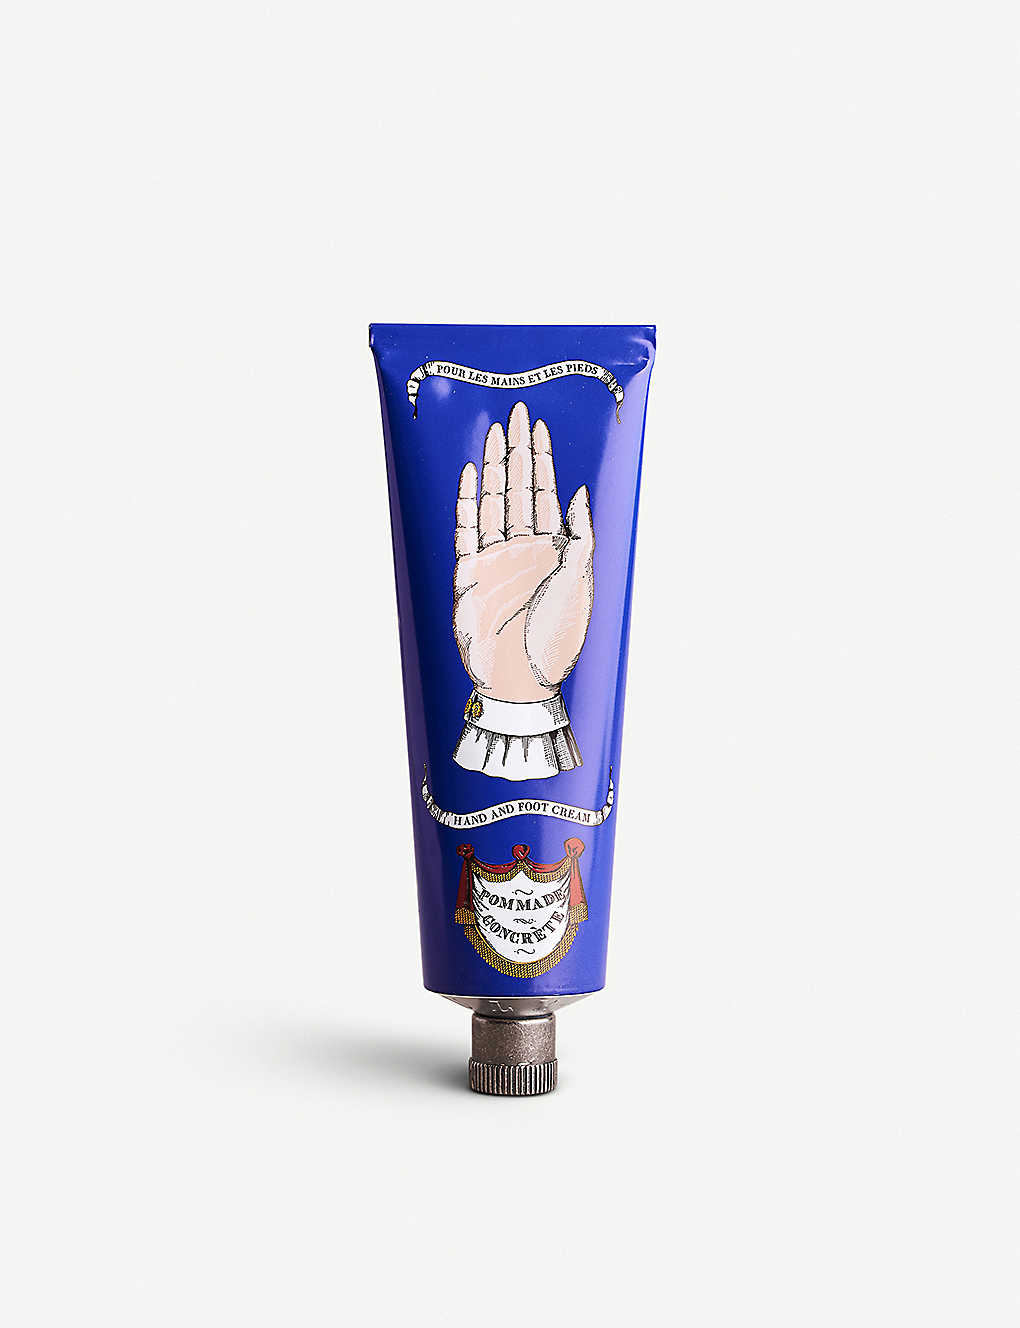 Buly 1803 + BULY 1803 Pommade Concrète Hand and Foot cream 75g